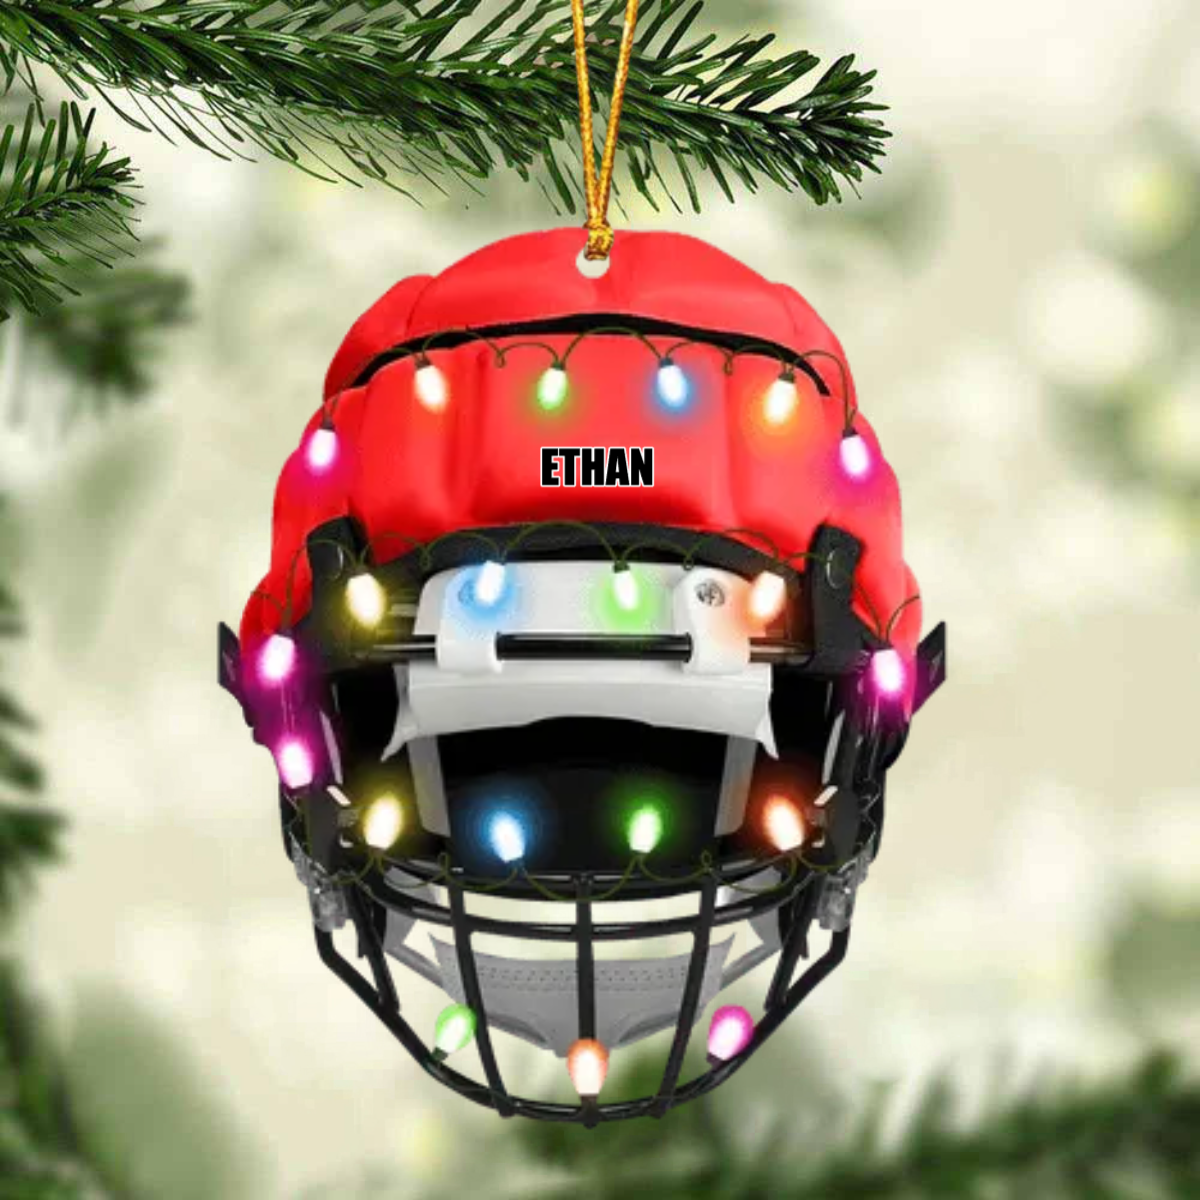 American Football Helmet - Personalized Christmas Ornament/ Gift for American Football Lover/ Fan